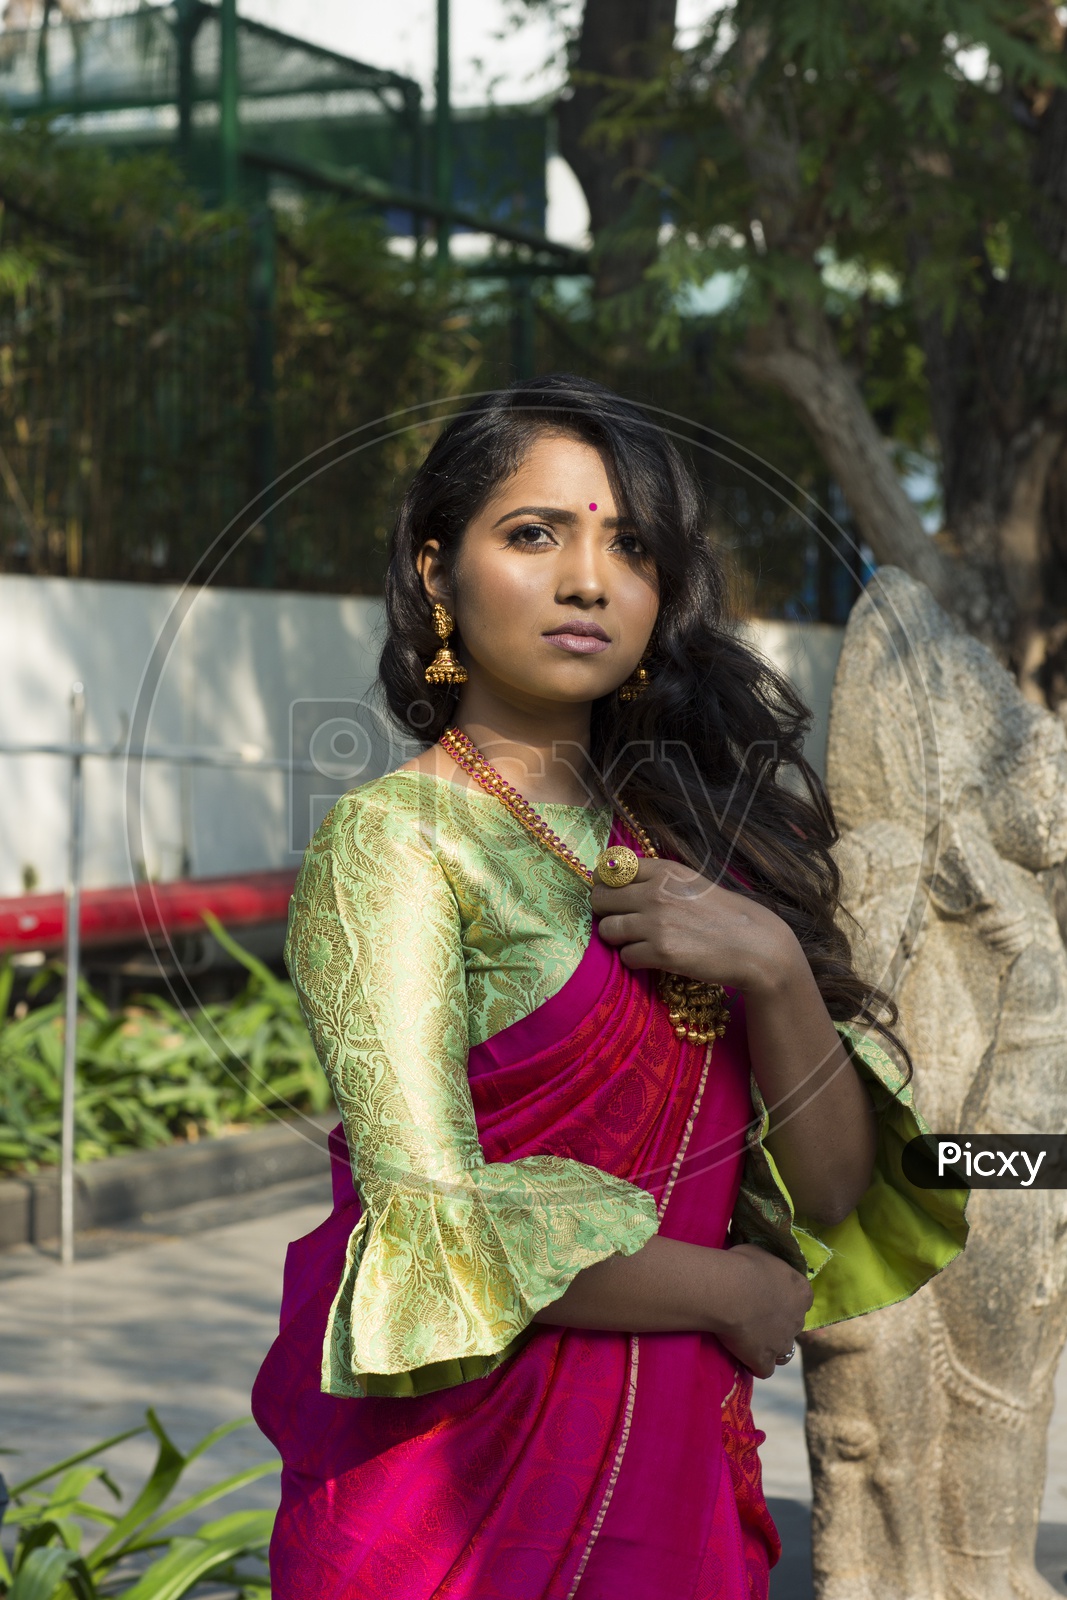 Image of Traditional Indian Female/Woman Model in Purple Saree, green  Blouse-OQ071002-Picxy